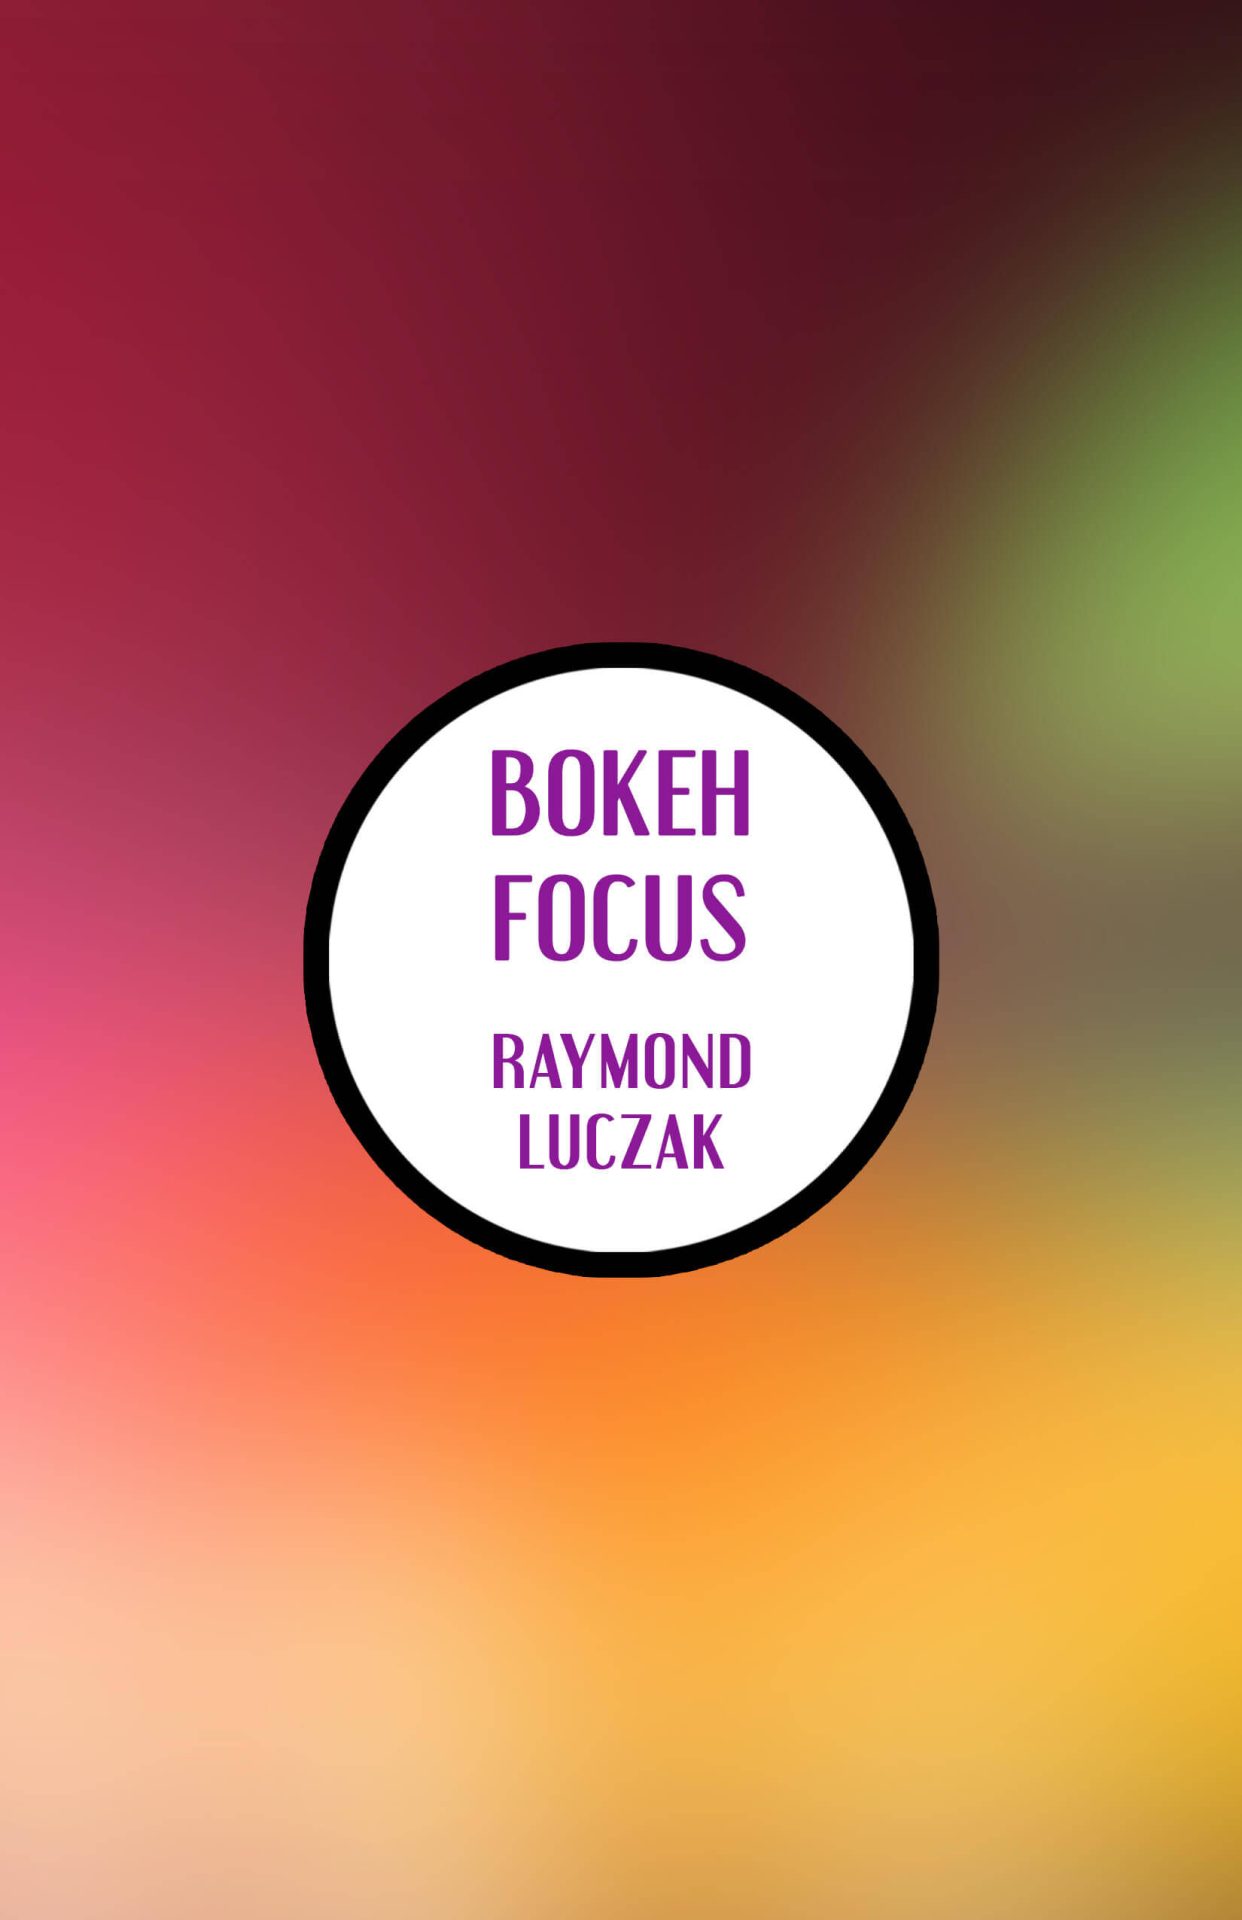 Against a hazy but colorful background is a solid white circle with a thick black border showing the text in purple: BOKEH FOCUS | RAYMOND LUCZAK.